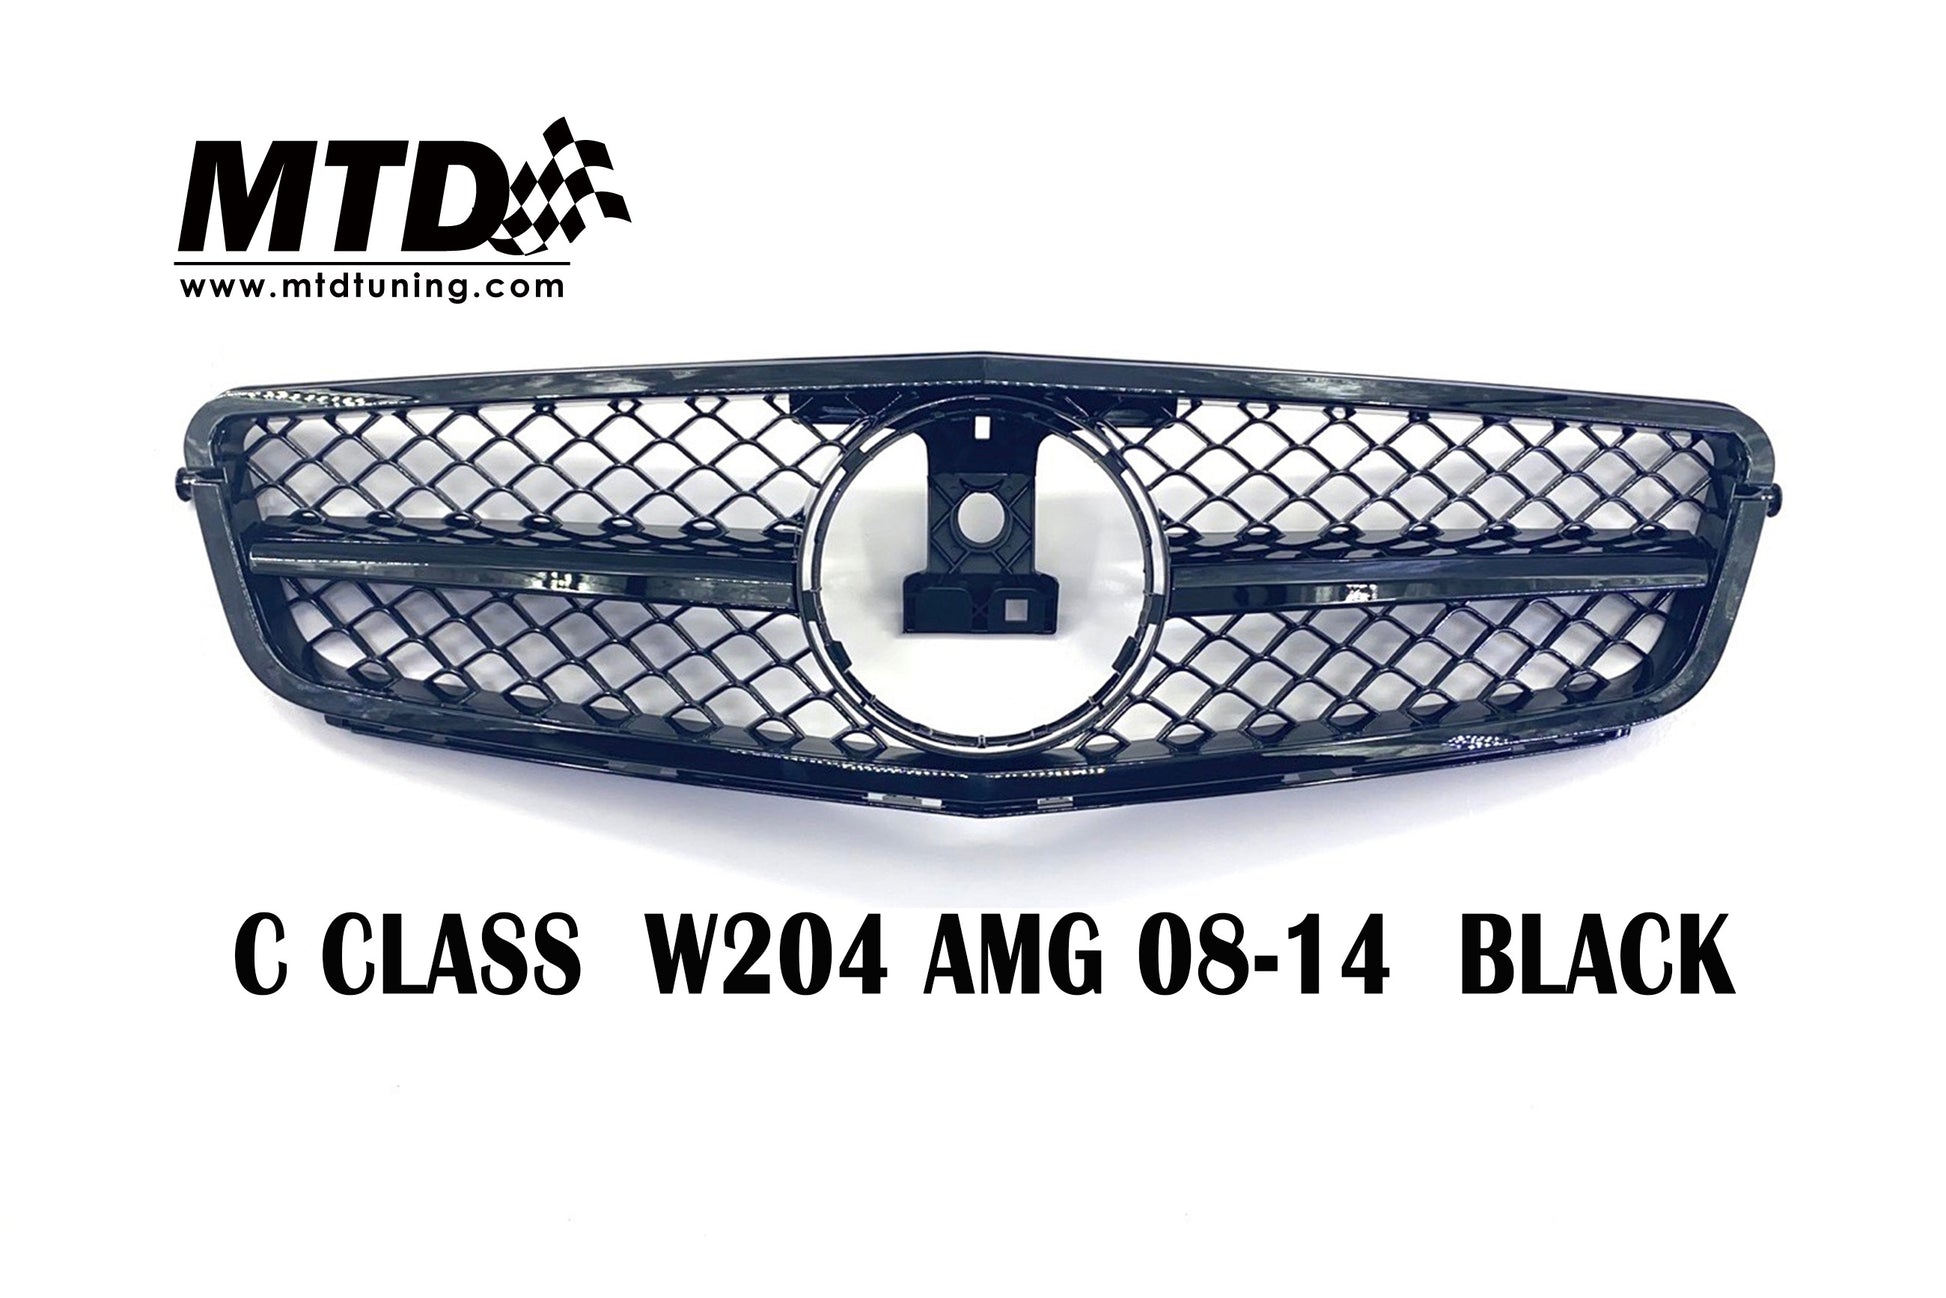 Mercedes-Benz C Class W204 Front Grille AMG 08-14 Black 